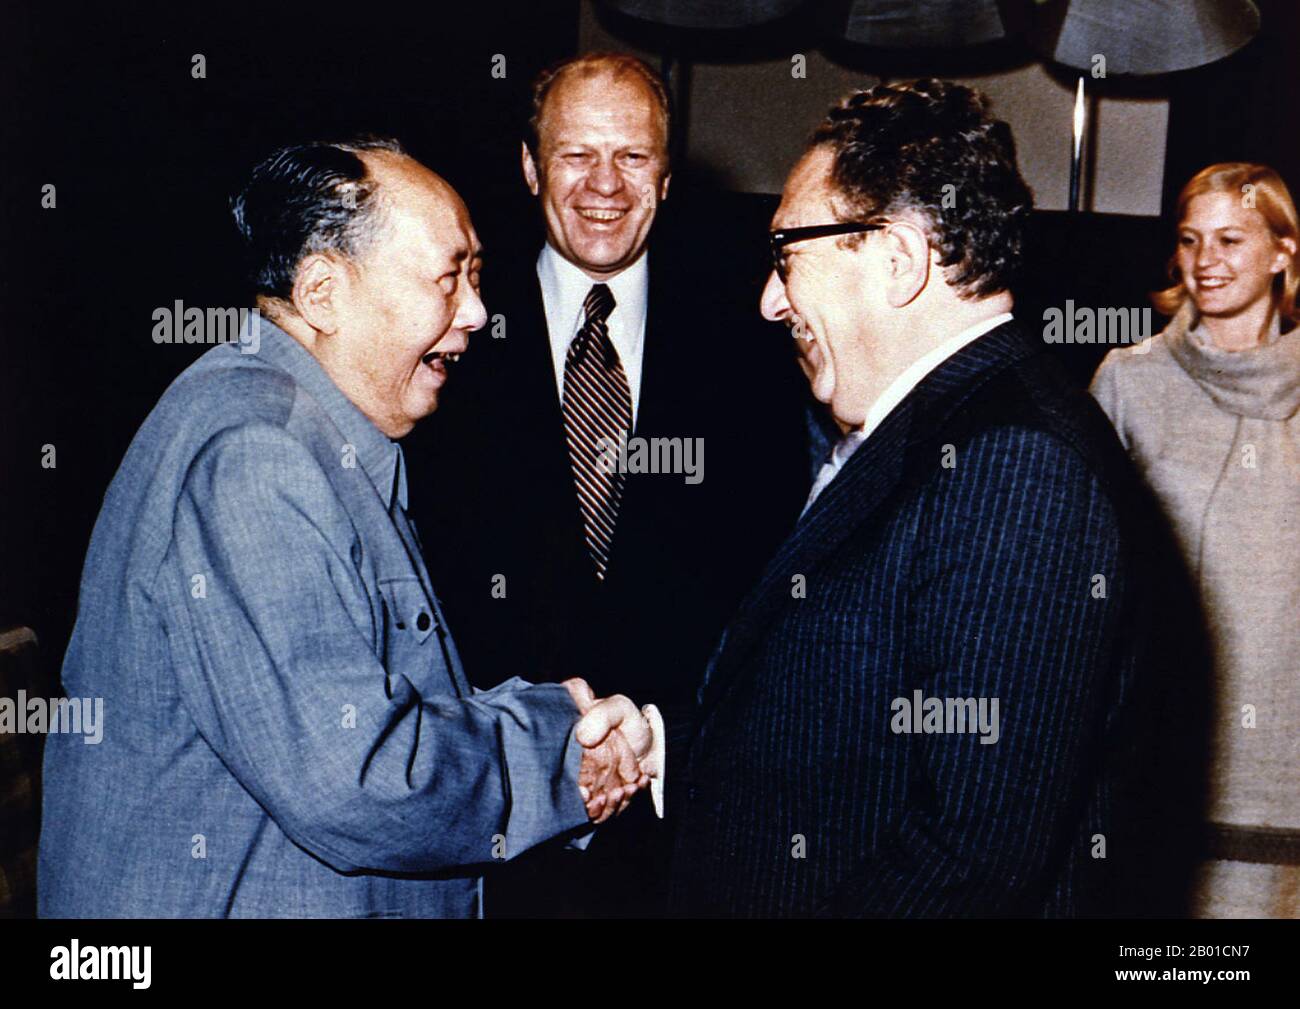 China/USA: Chairman Mao Zedong shaking hands with Henry Kissinger as President Gerald Ford and his daughter Susan Ford look on, Beijing, 2 December 1975  Kissinger served as National Security Advisor and later concurrently as Secretary of State in the administrations of Presidents Richard Nixon and Gerald Ford. After his term, his opinion was still sought by many following presidents and world leaders.  A proponent of Realpolitik, Kissinger played a dominant role in United States foreign policy between 1969 and 1977. During this period, he pioneered the policy of détente with the Soviet Union. Stock Photo